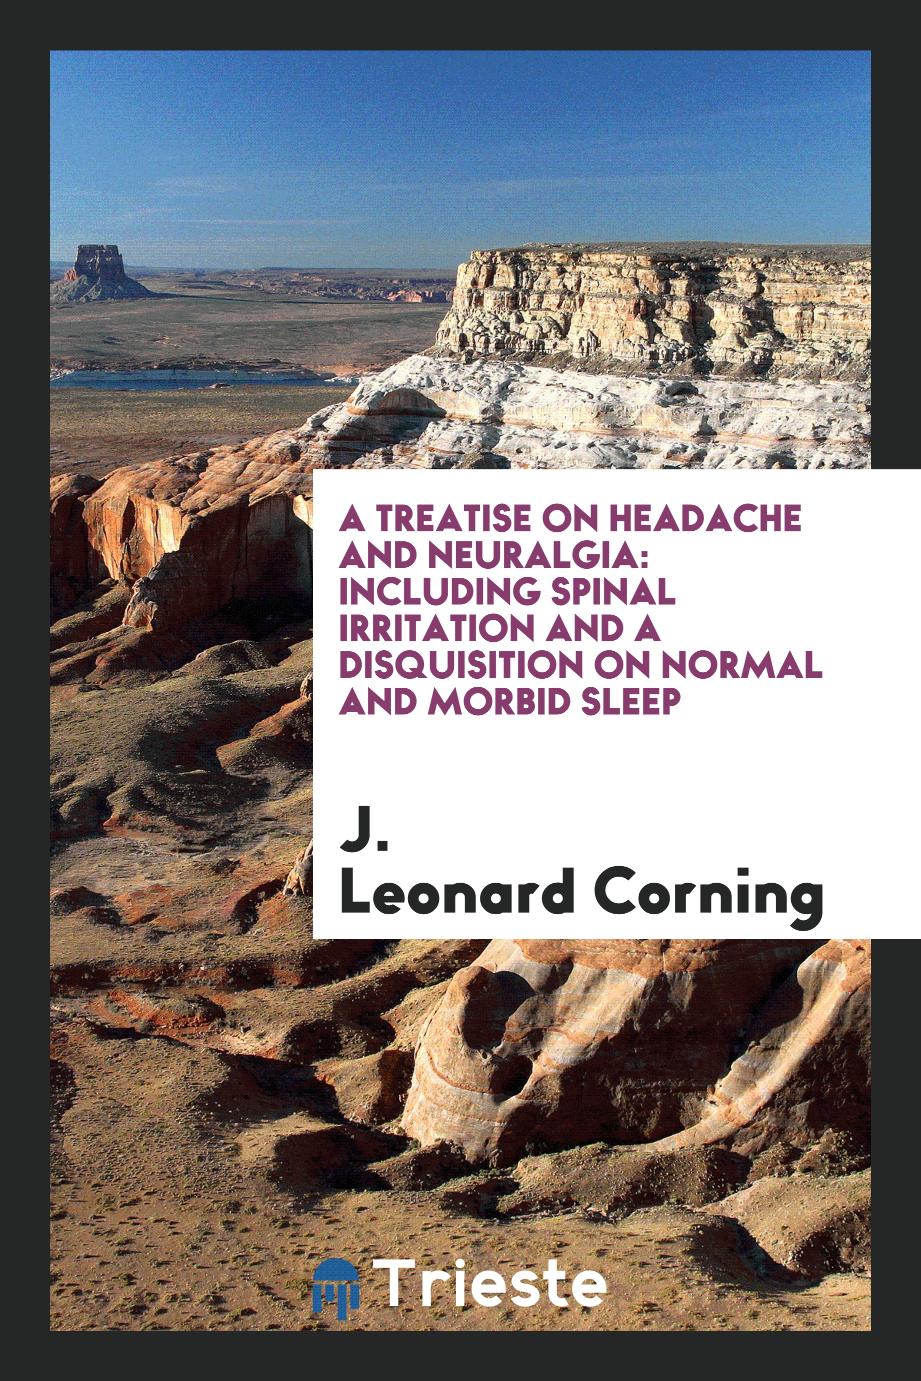 A Treatise on Headache and Neuralgia: Including Spinal Irritation and a Disquisition on Normal and Morbid Sleep